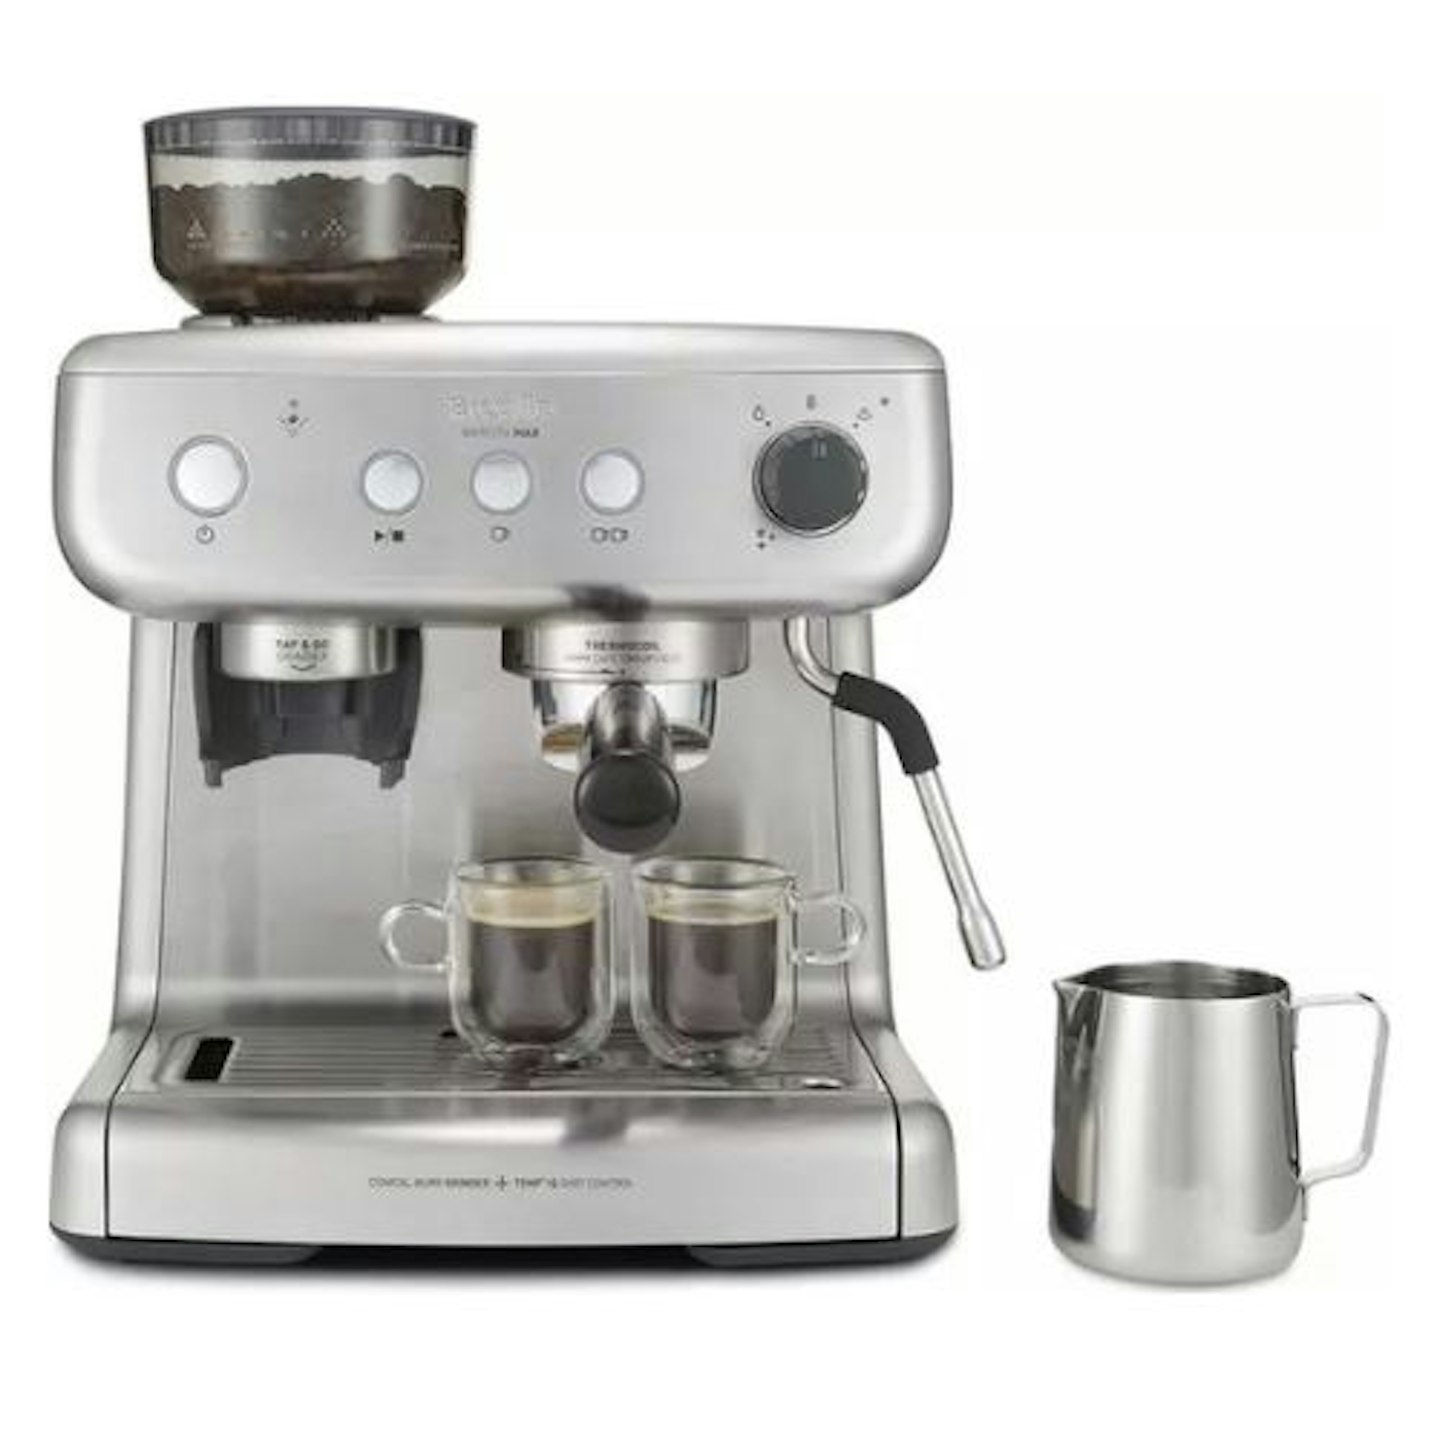 BREVILLE VCF126 Barista Max Coffee Machine - Stainless Steel